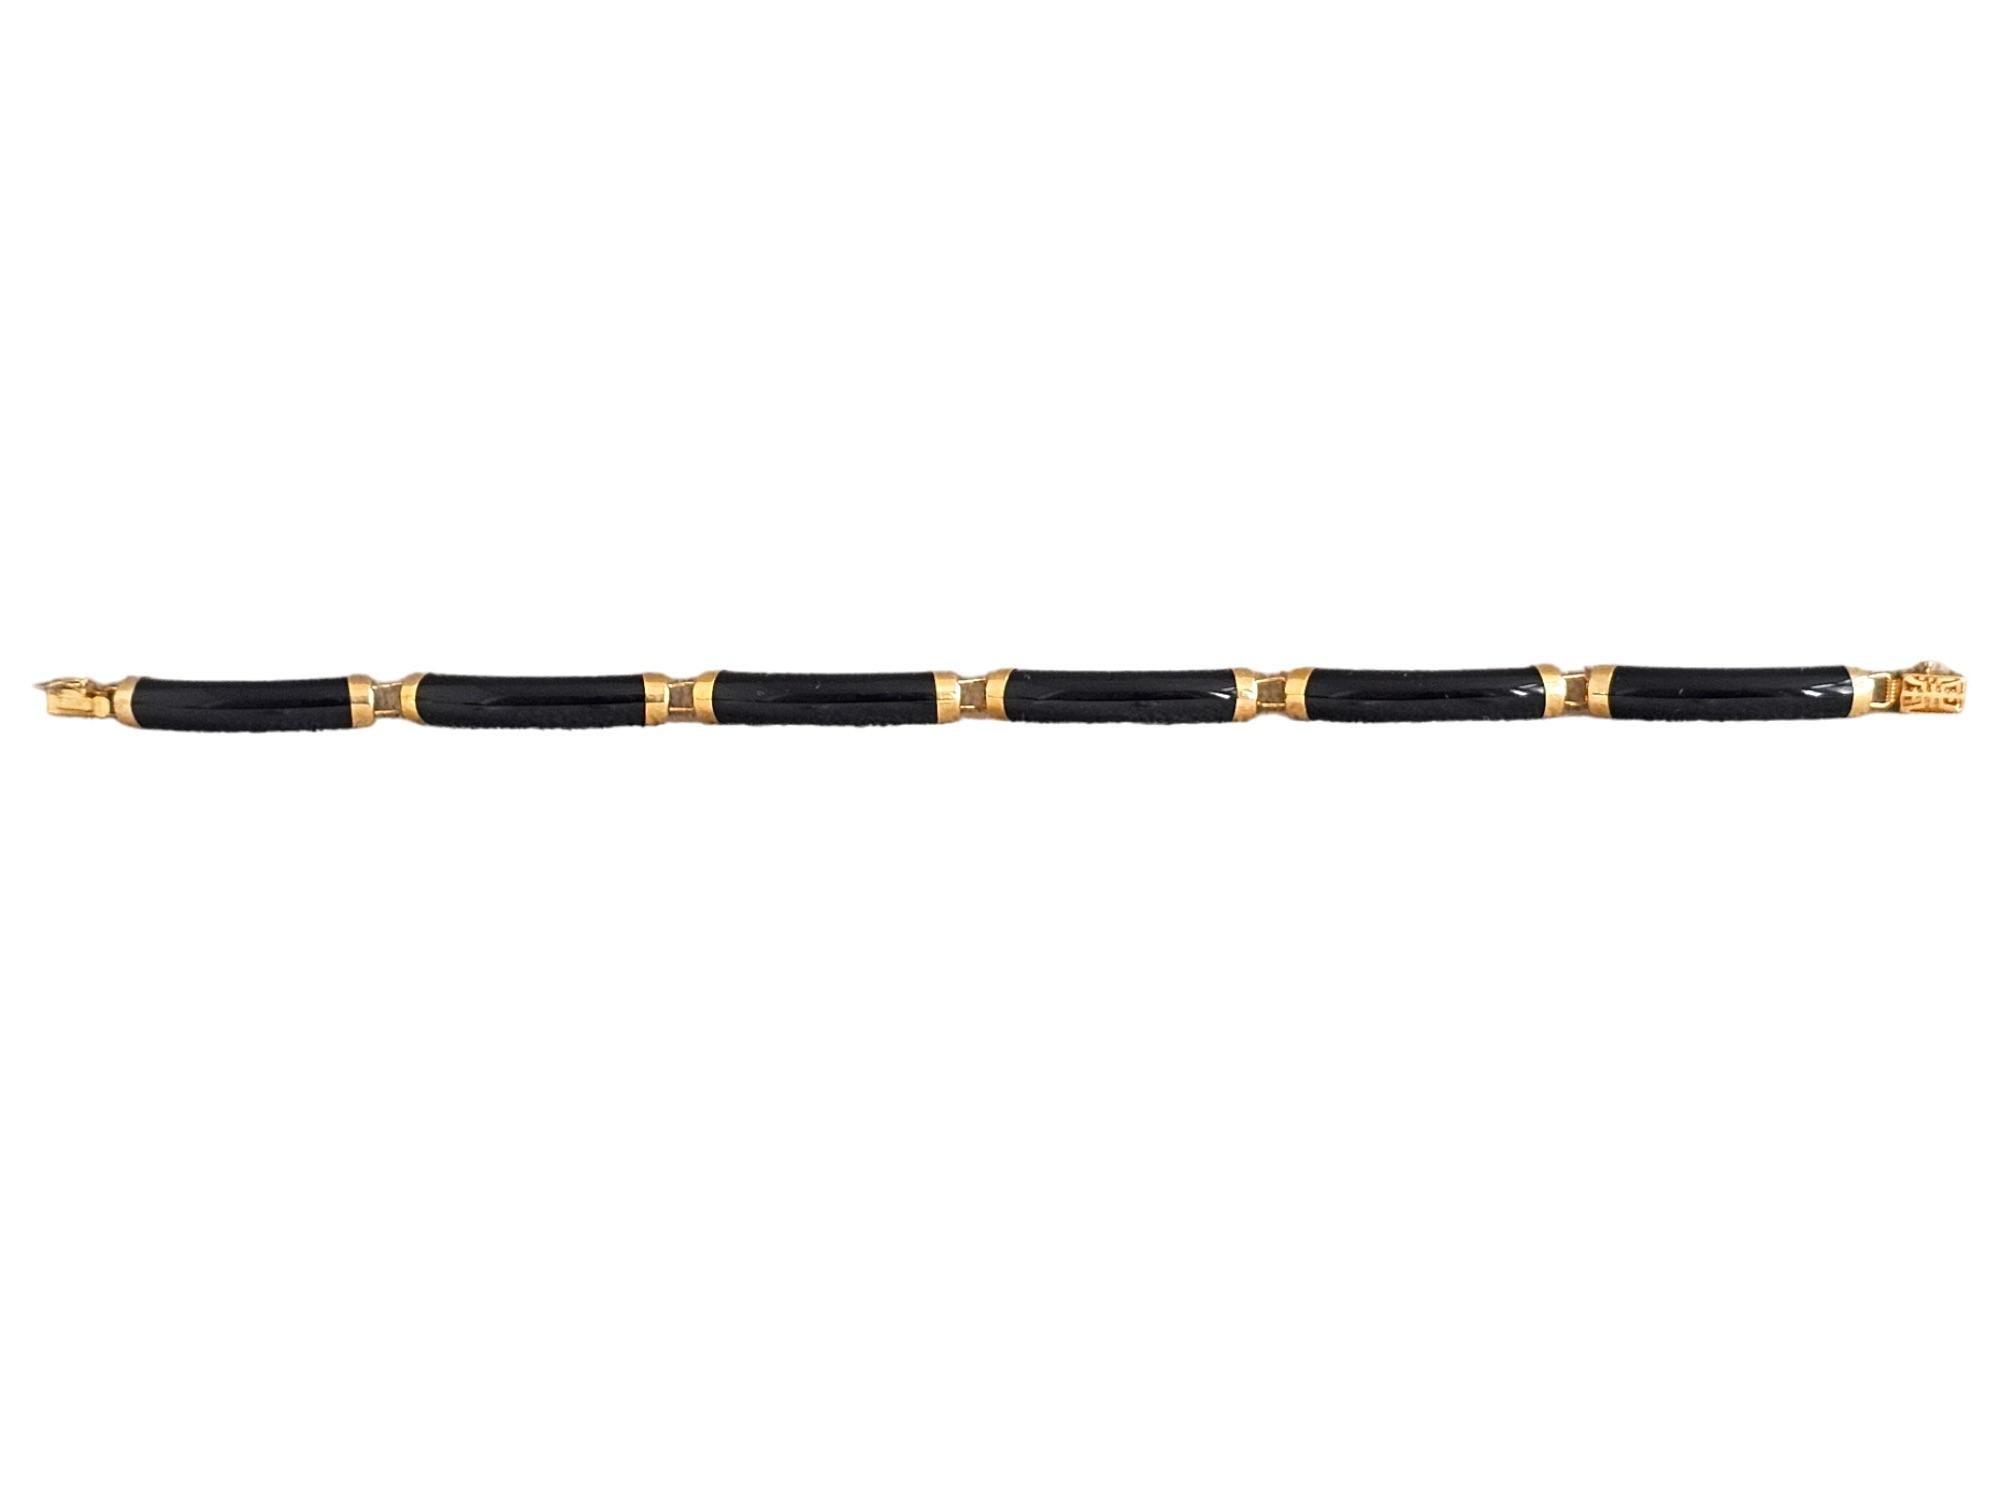 Fortune Black Onyx Tube Bars Bracelet with 14K Solid Yellow Gold links and clasp For Sale 6